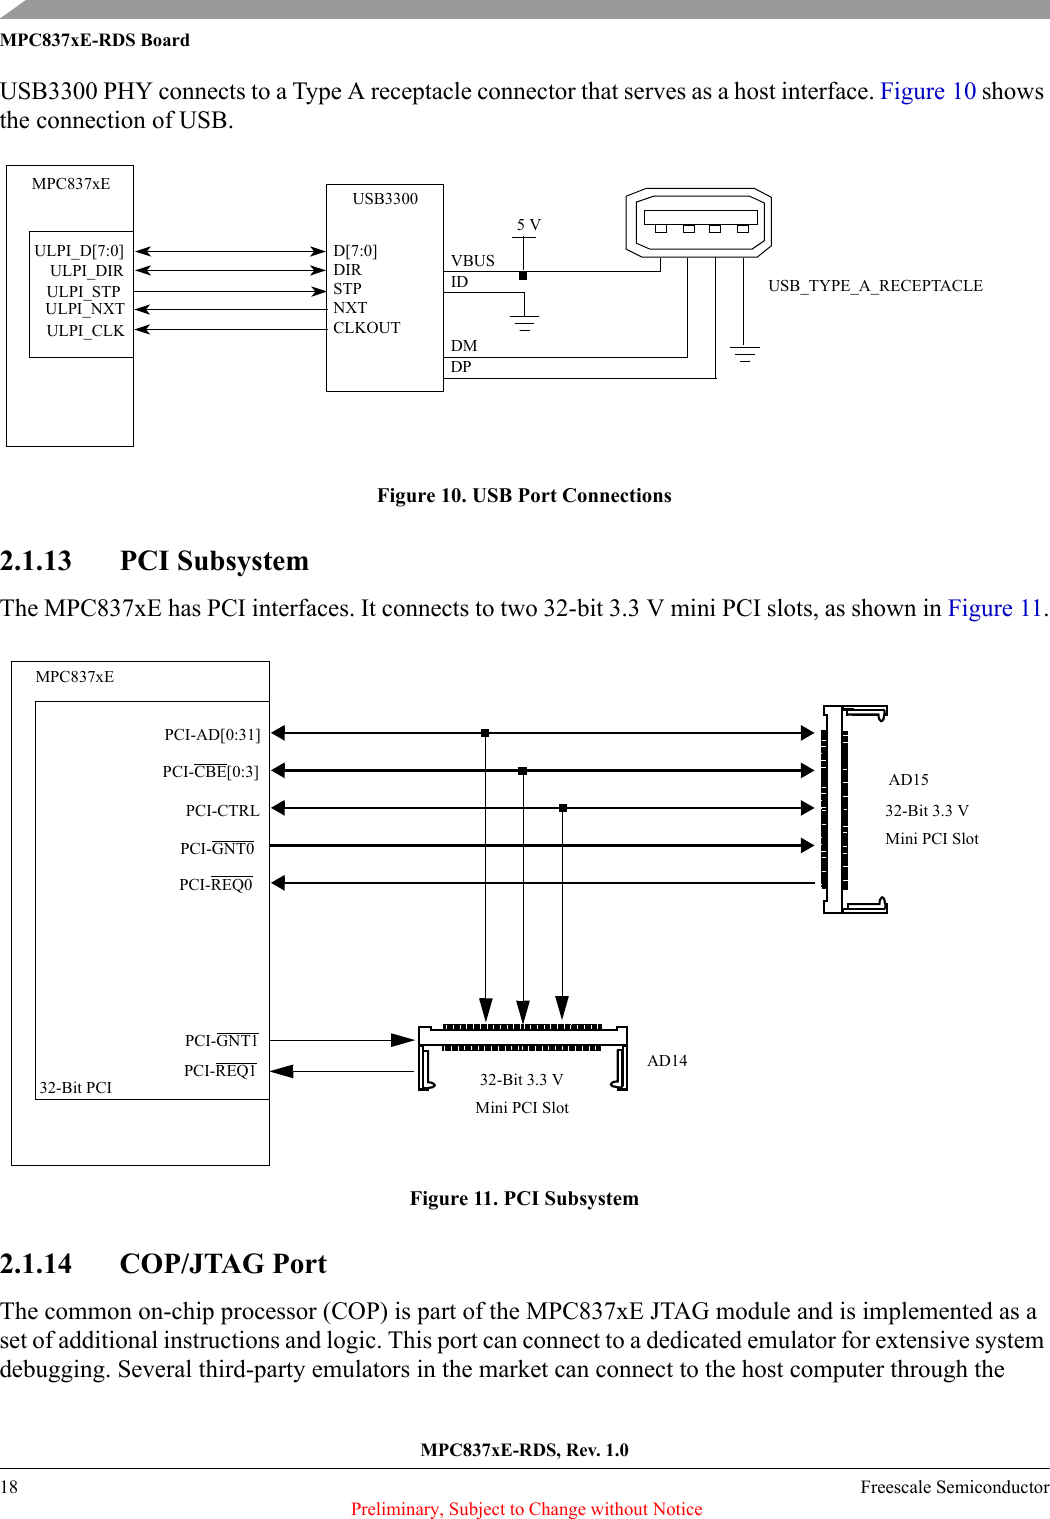 MPC837xE-RDS, Rev. 1.018 Freescale Semiconductor Preliminary, Subject to Change without NoticeMPC837xE-RDS BoardUSB3300 PHY connects to a Type A receptacle connector that serves as a host interface. Figure 10 shows the connection of USB.Figure 10. USB Port Connections2.1.13 PCI SubsystemThe MPC837xE has PCI interfaces. It connects to two 32-bit 3.3 V mini PCI slots, as shown in Figure 11.Figure 11. PCI Subsystem2.1.14 COP/JTAG PortThe common on-chip processor (COP) is part of the MPC837xE JTAG module and is implemented as a set of additional instructions and logic. This port can connect to a dedicated emulator for extensive system debugging. Several third-party emulators in the market can connect to the host computer through the MPC837xEULPI_D[7:0]ULPI_STPULPI_NXTULPI_CLKDIRUSB3300D[7:0]STPNXTCLKOUTULPI_DIR VBUSDMID5VDPUSB_TYPE_A_RECEPTACLEMPC837xE32-Bit PCIPCI-AD[0:31]PCI-CBE[0:3]PCI-REQ0 PCI-GNT0 PCI-CTRL 32-Bit 3.3 VMini PCI Slot32-Bit 3.3 VMini PCI SlotPCI-REQ1PCI-GNT1AD15AD14  